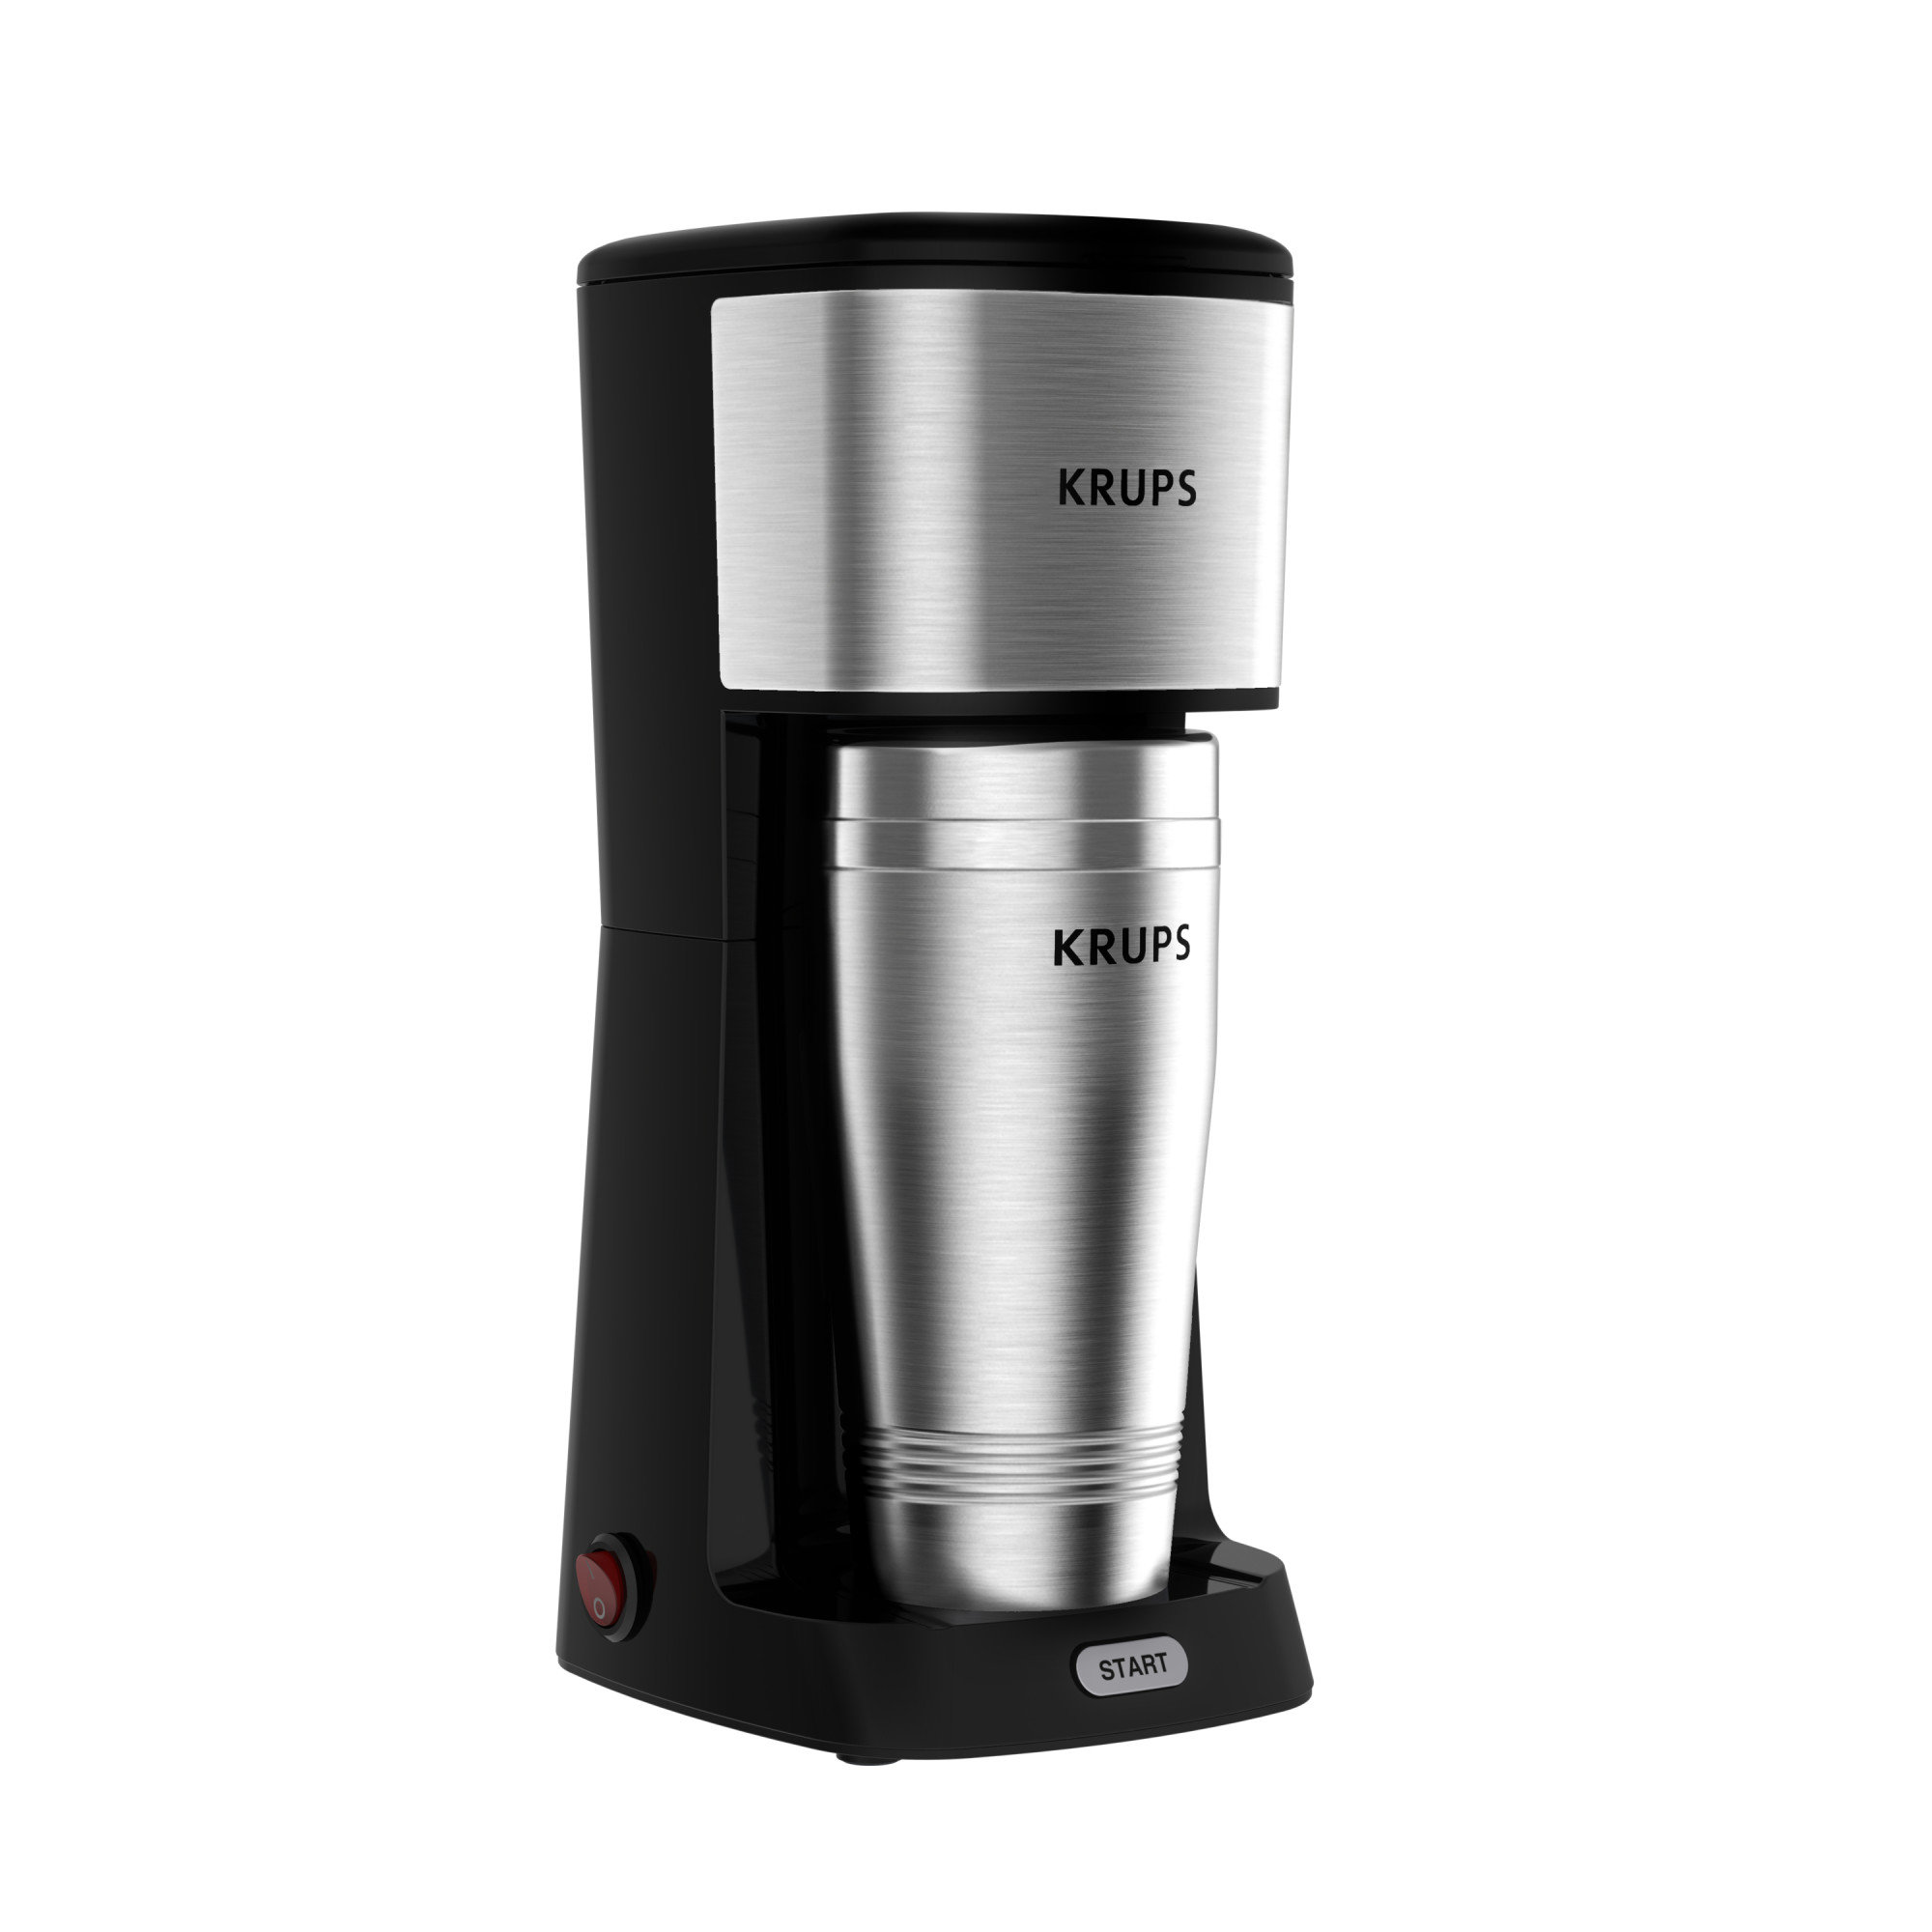 IMUSA Simply Brew To Go Single Serve Drip Coffee Maker With Travel Tumbler